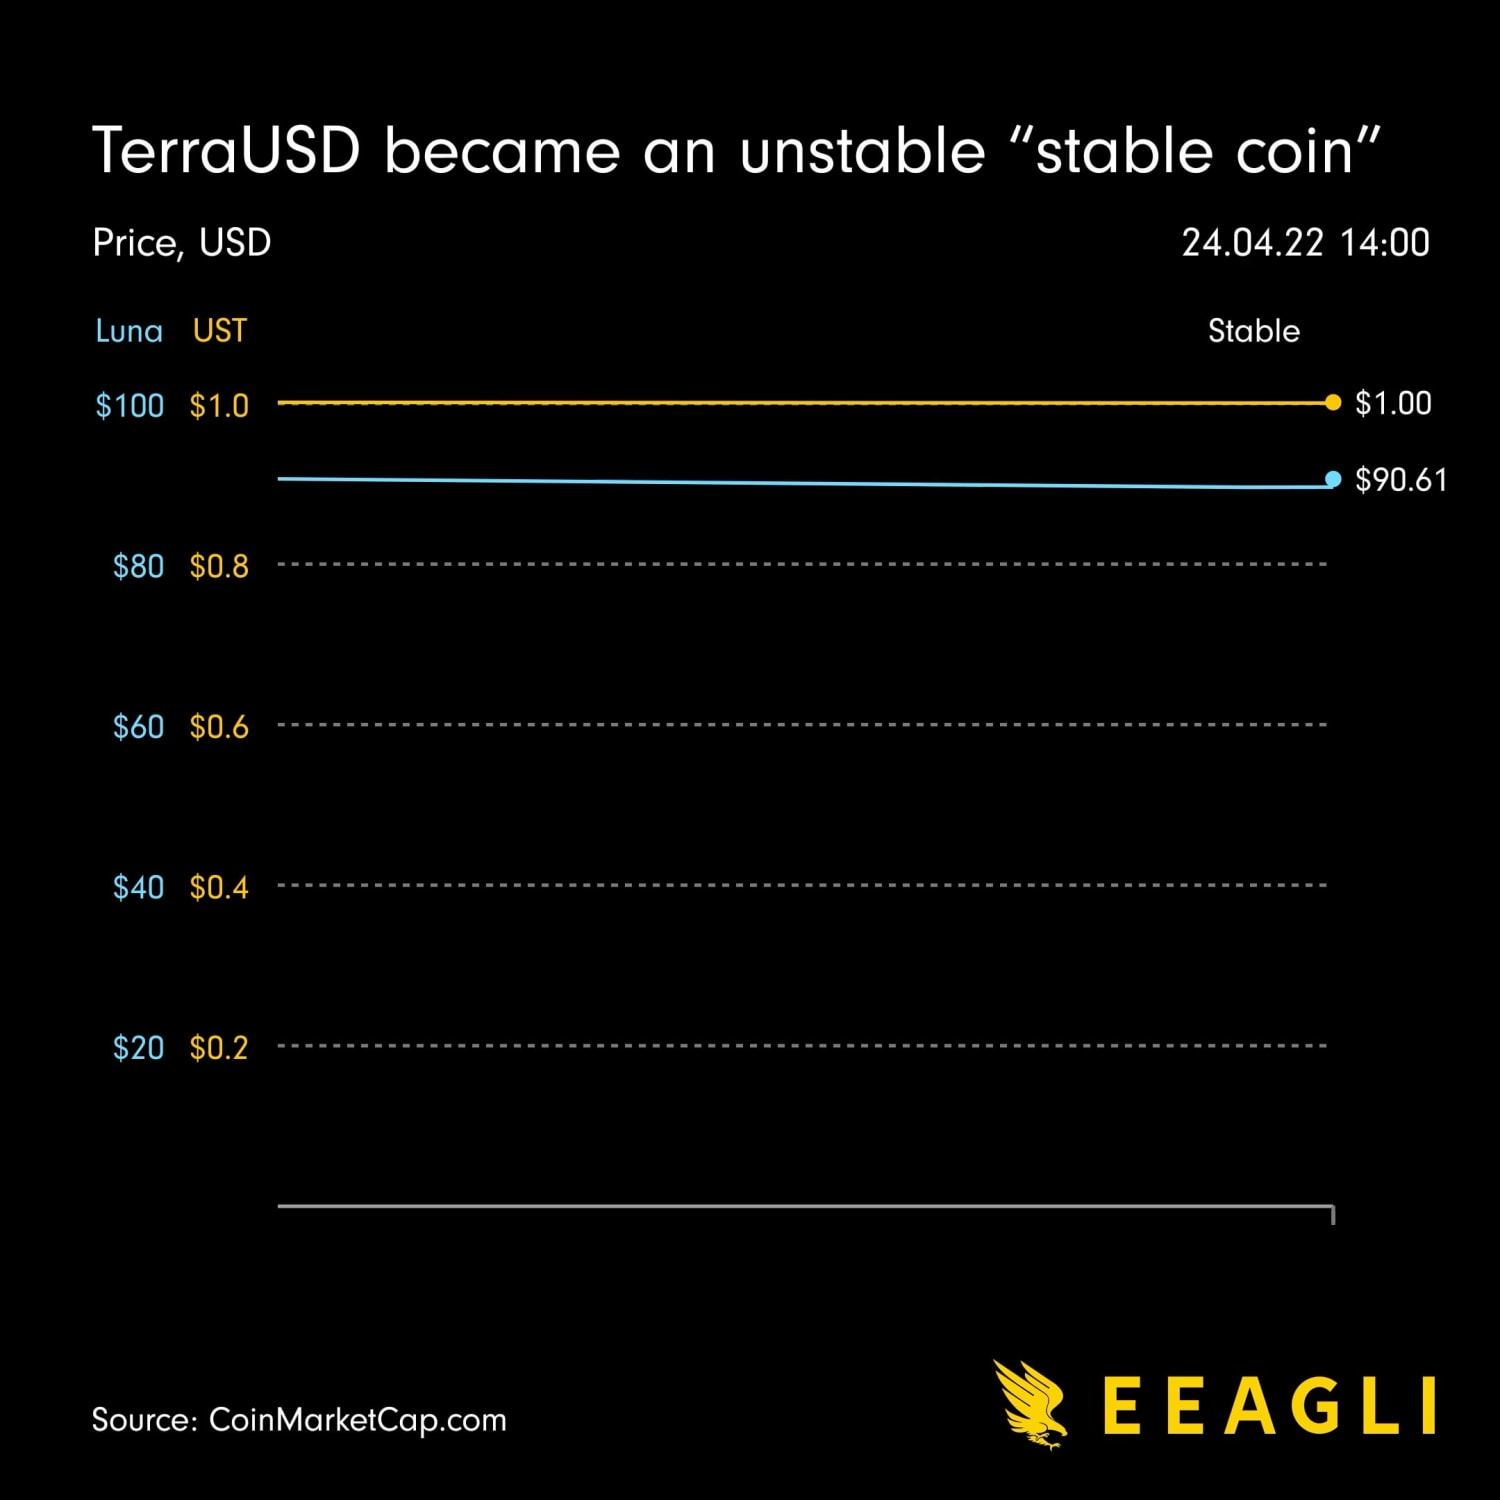 How TerraUSD became an unstable "stable coin"